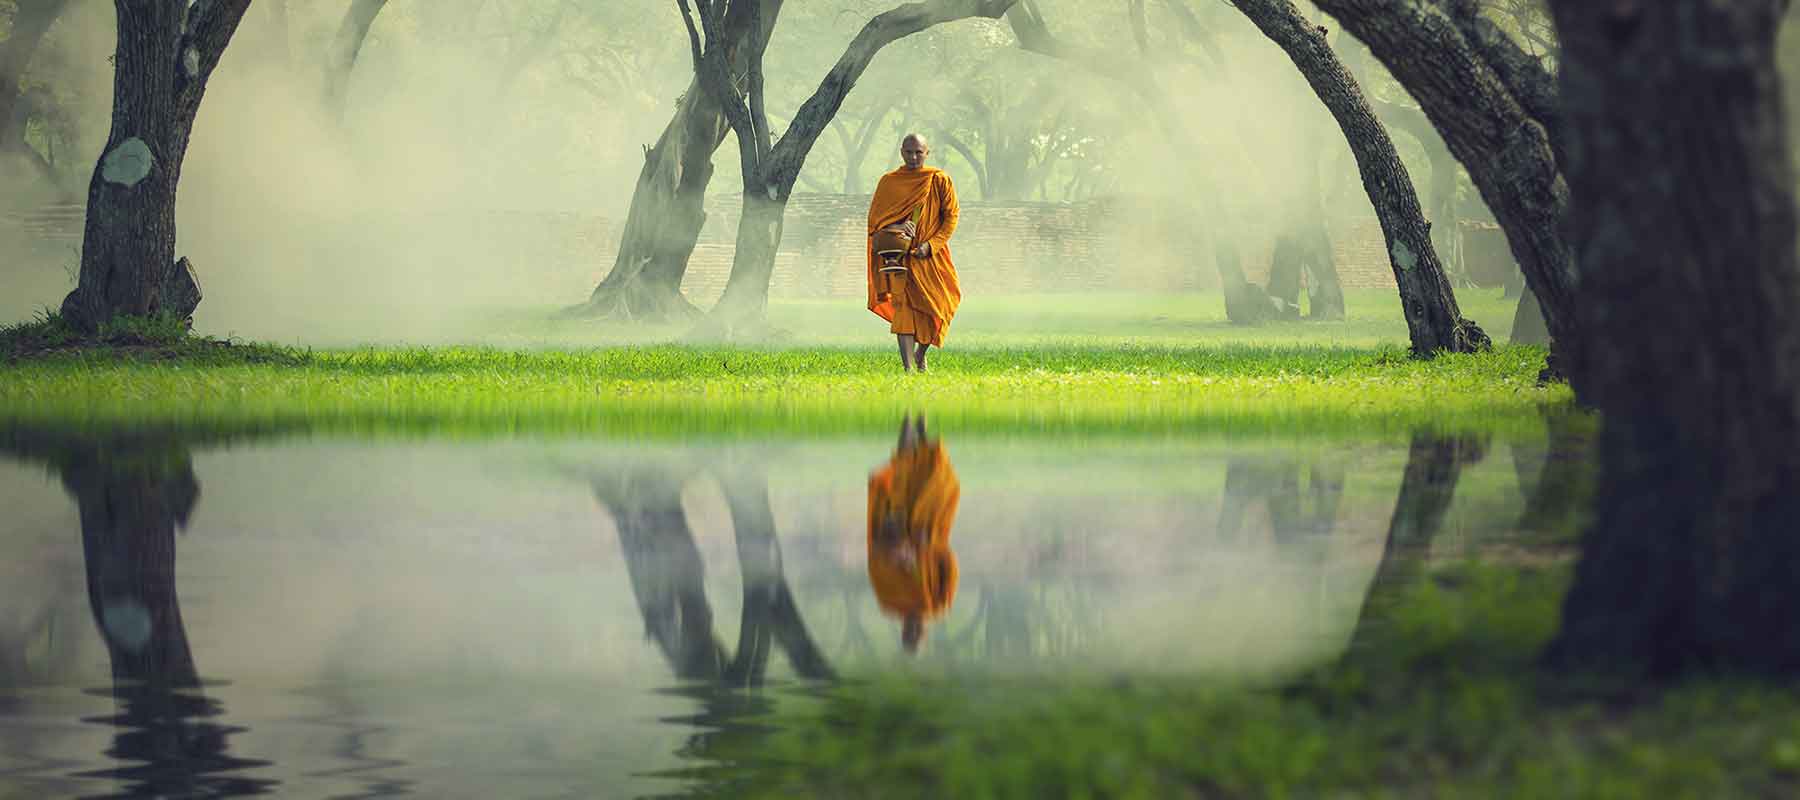 A monk walking towards water in a forest with his reflection in the water.